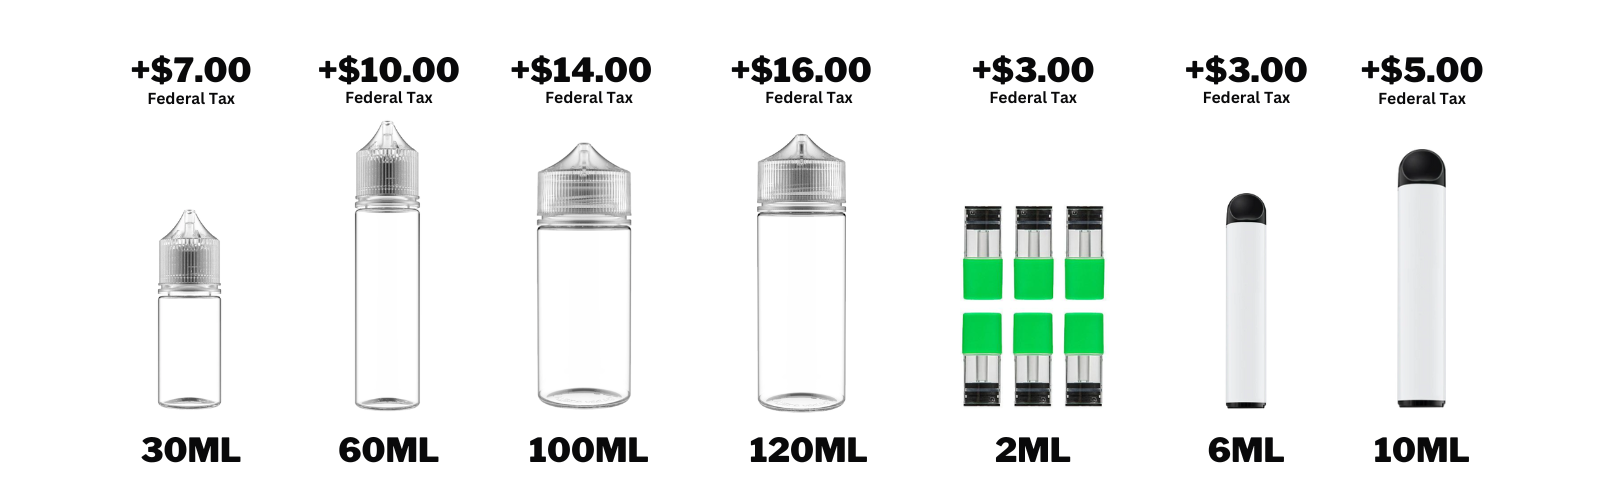 federal excise tax increase visual with bottle sizes